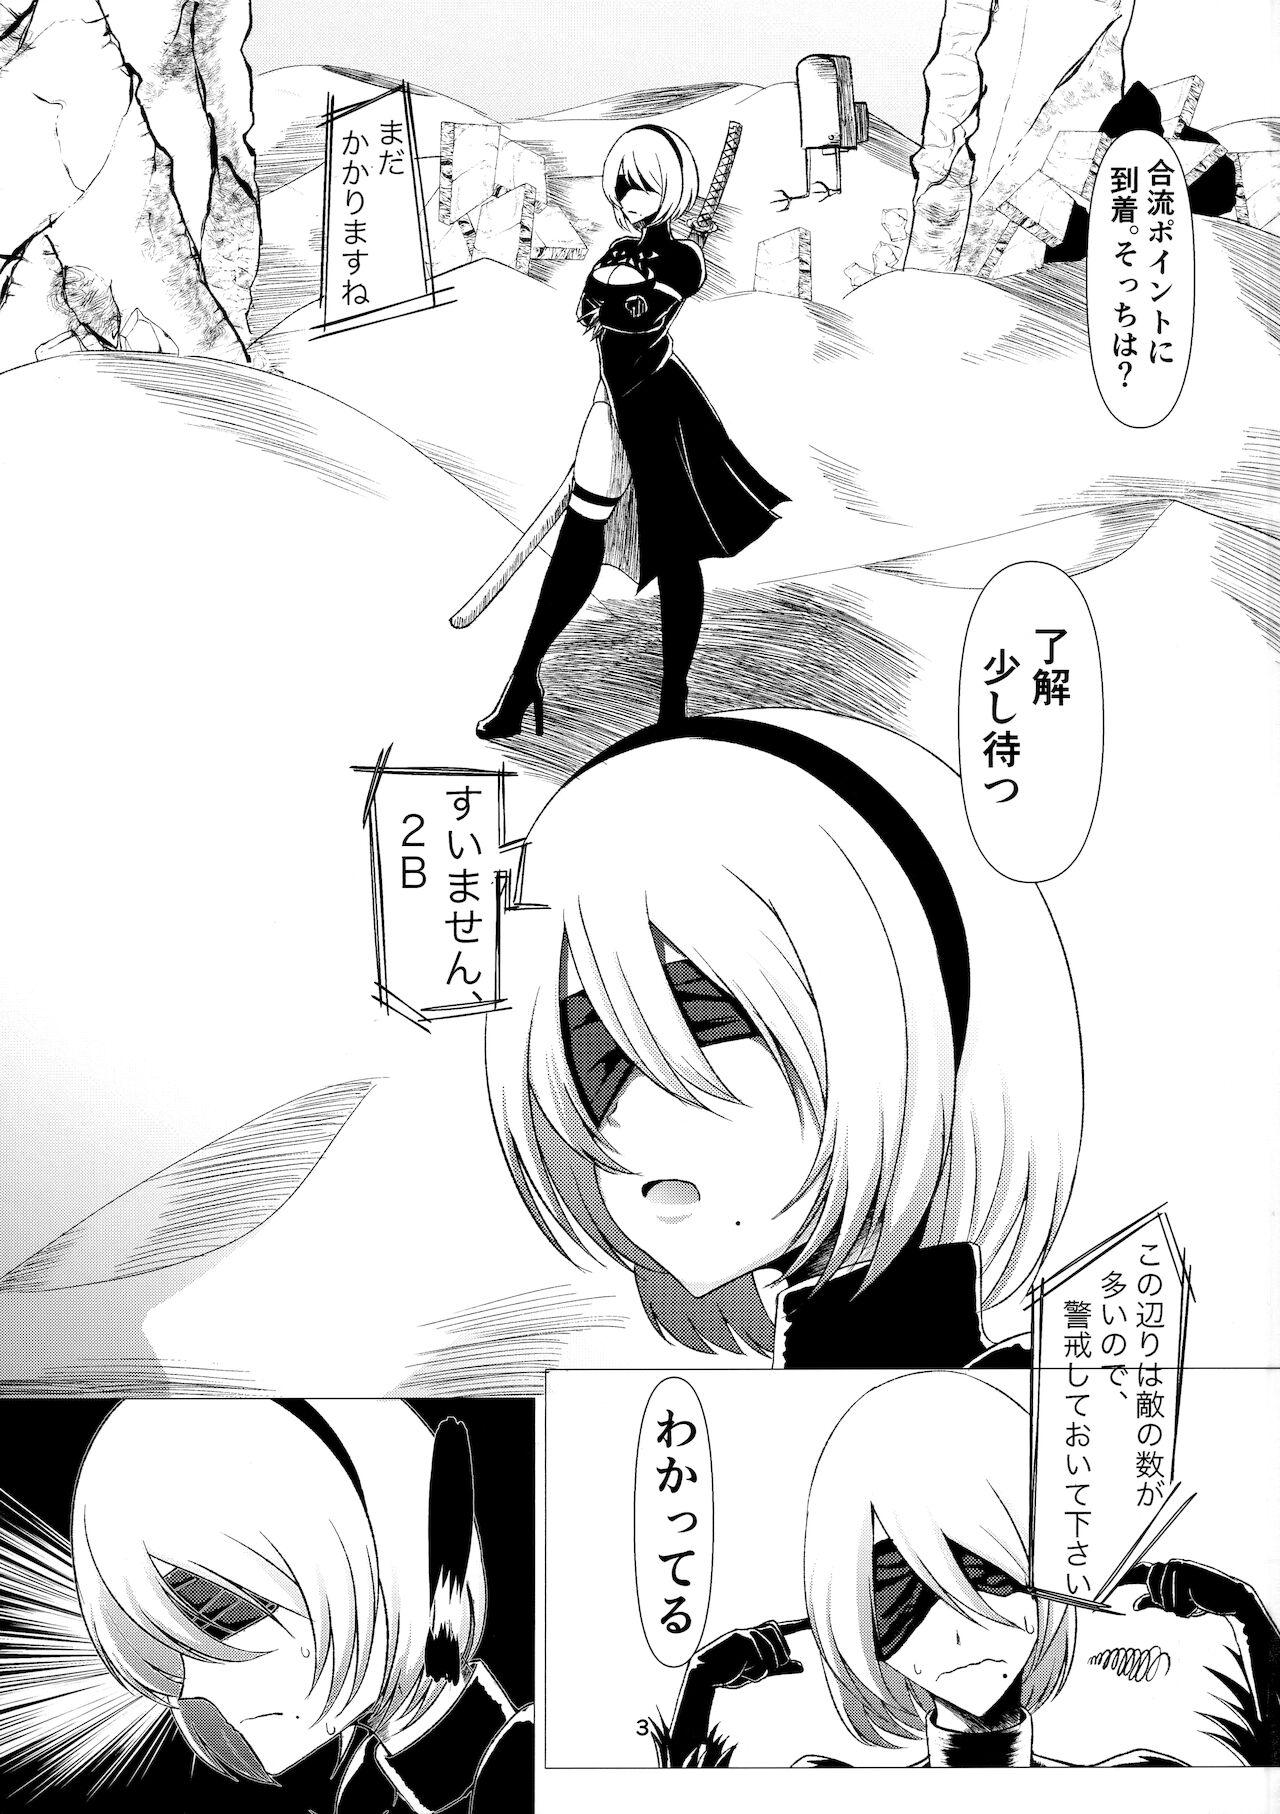 Daring E690BEE4B9B3E88289E5A5B4E99AB7 2B - Nier automata Freak - Page 2